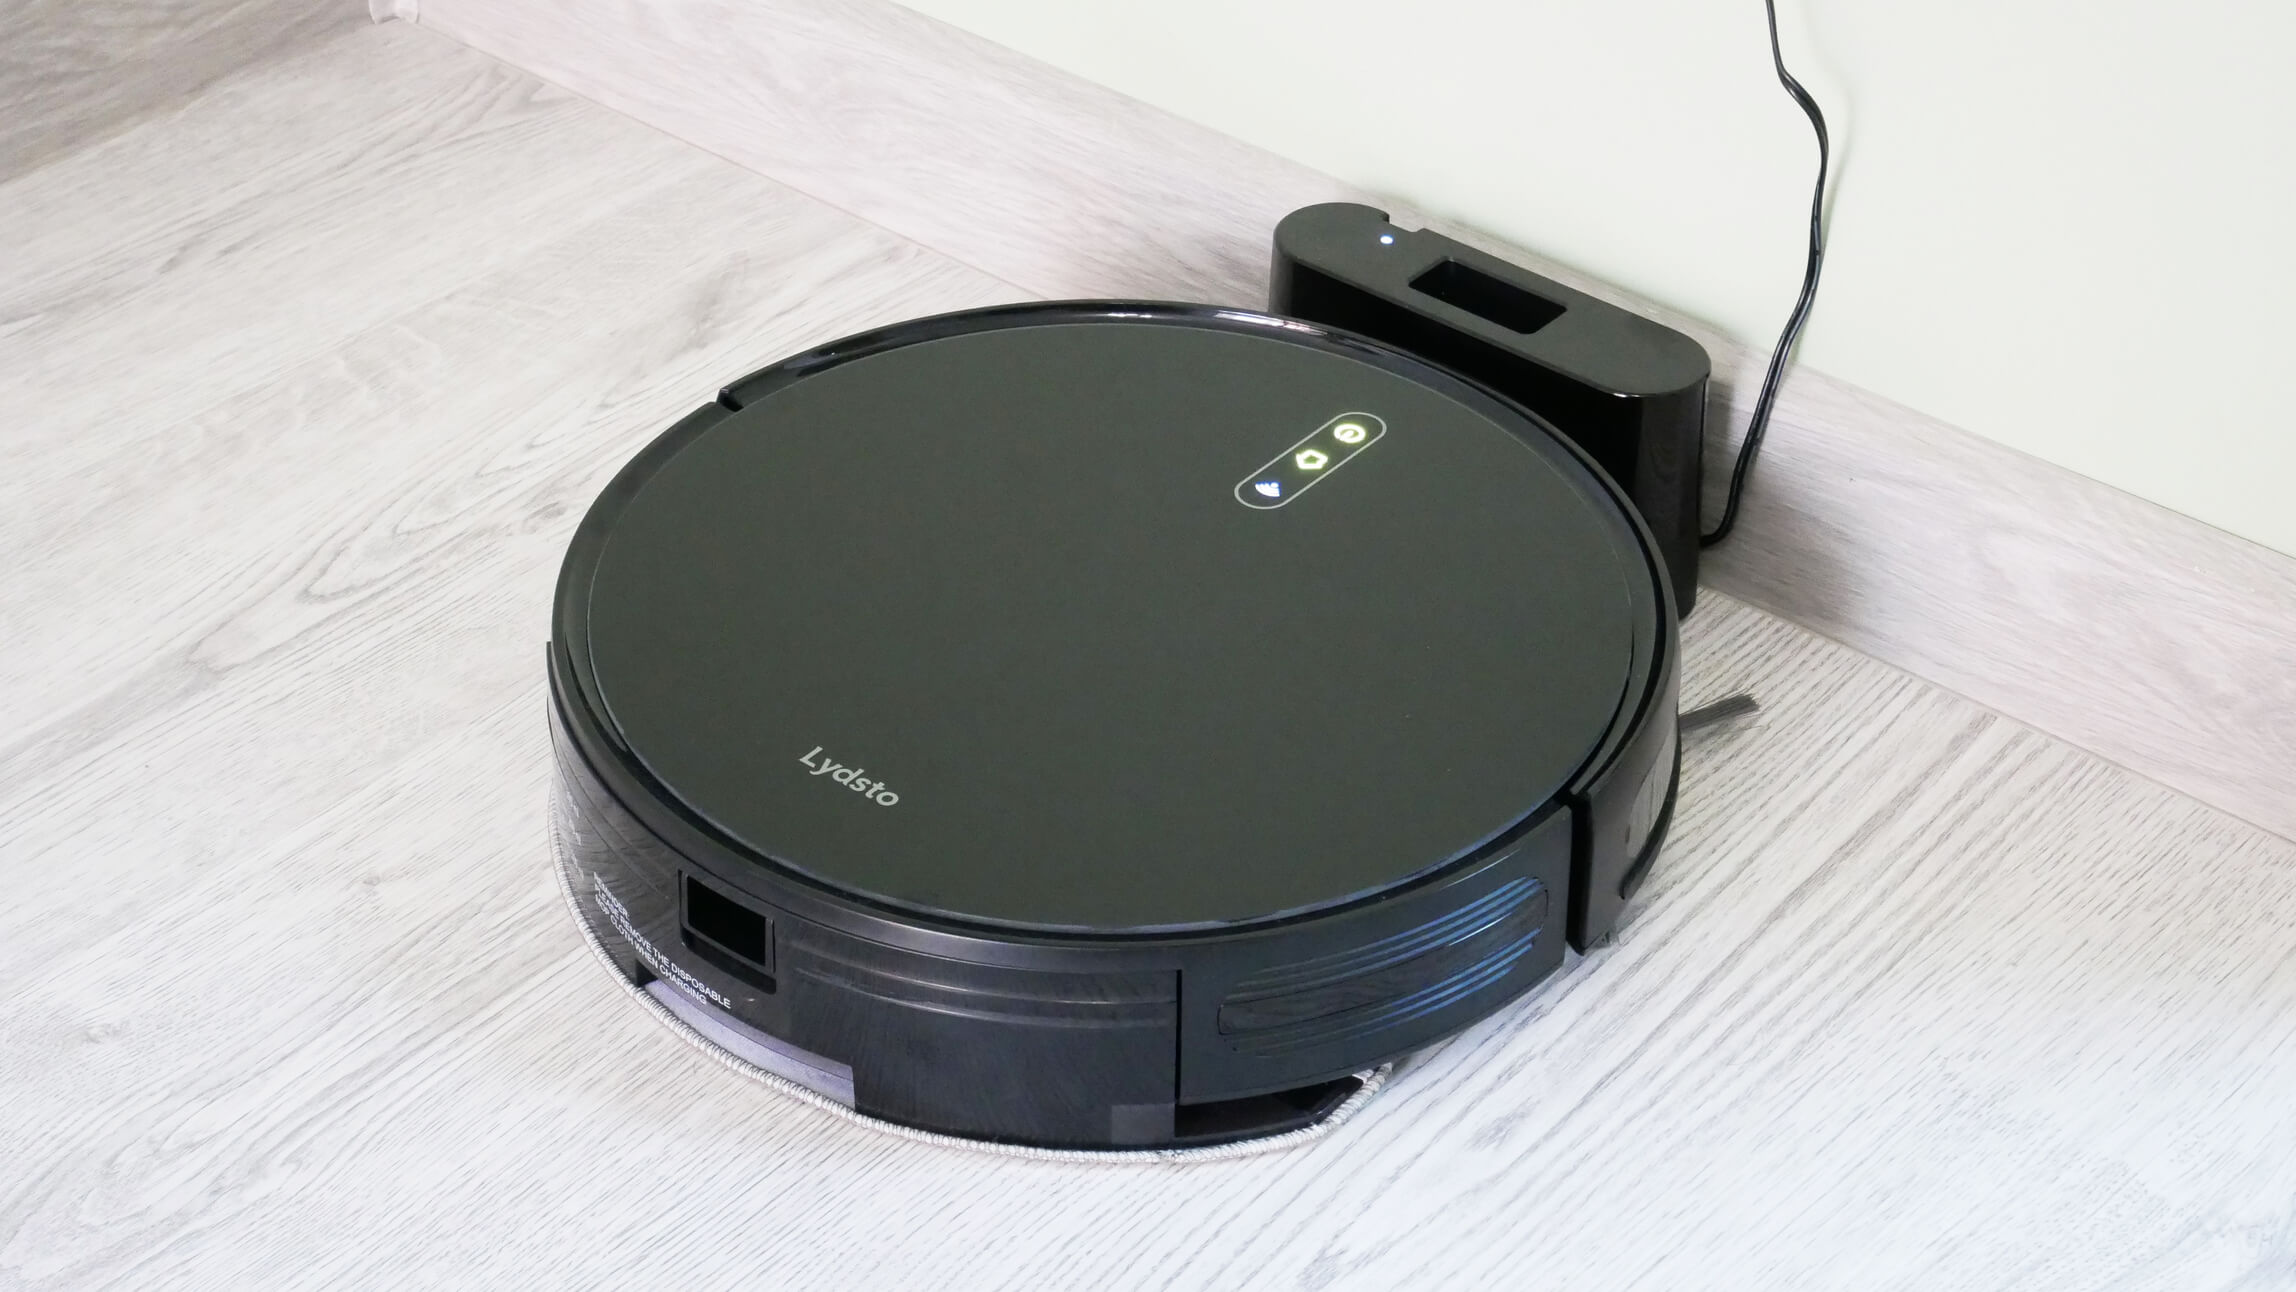 Xiaomi lydsto robot vacuum cleaner. Lydsto g1 робот пылесос. Xiaomi lydsto g1. Робот-пылесос Xiaomi lydsto g1 Black. Робот-пылесос Xiaomi Mijia Omni 1s.